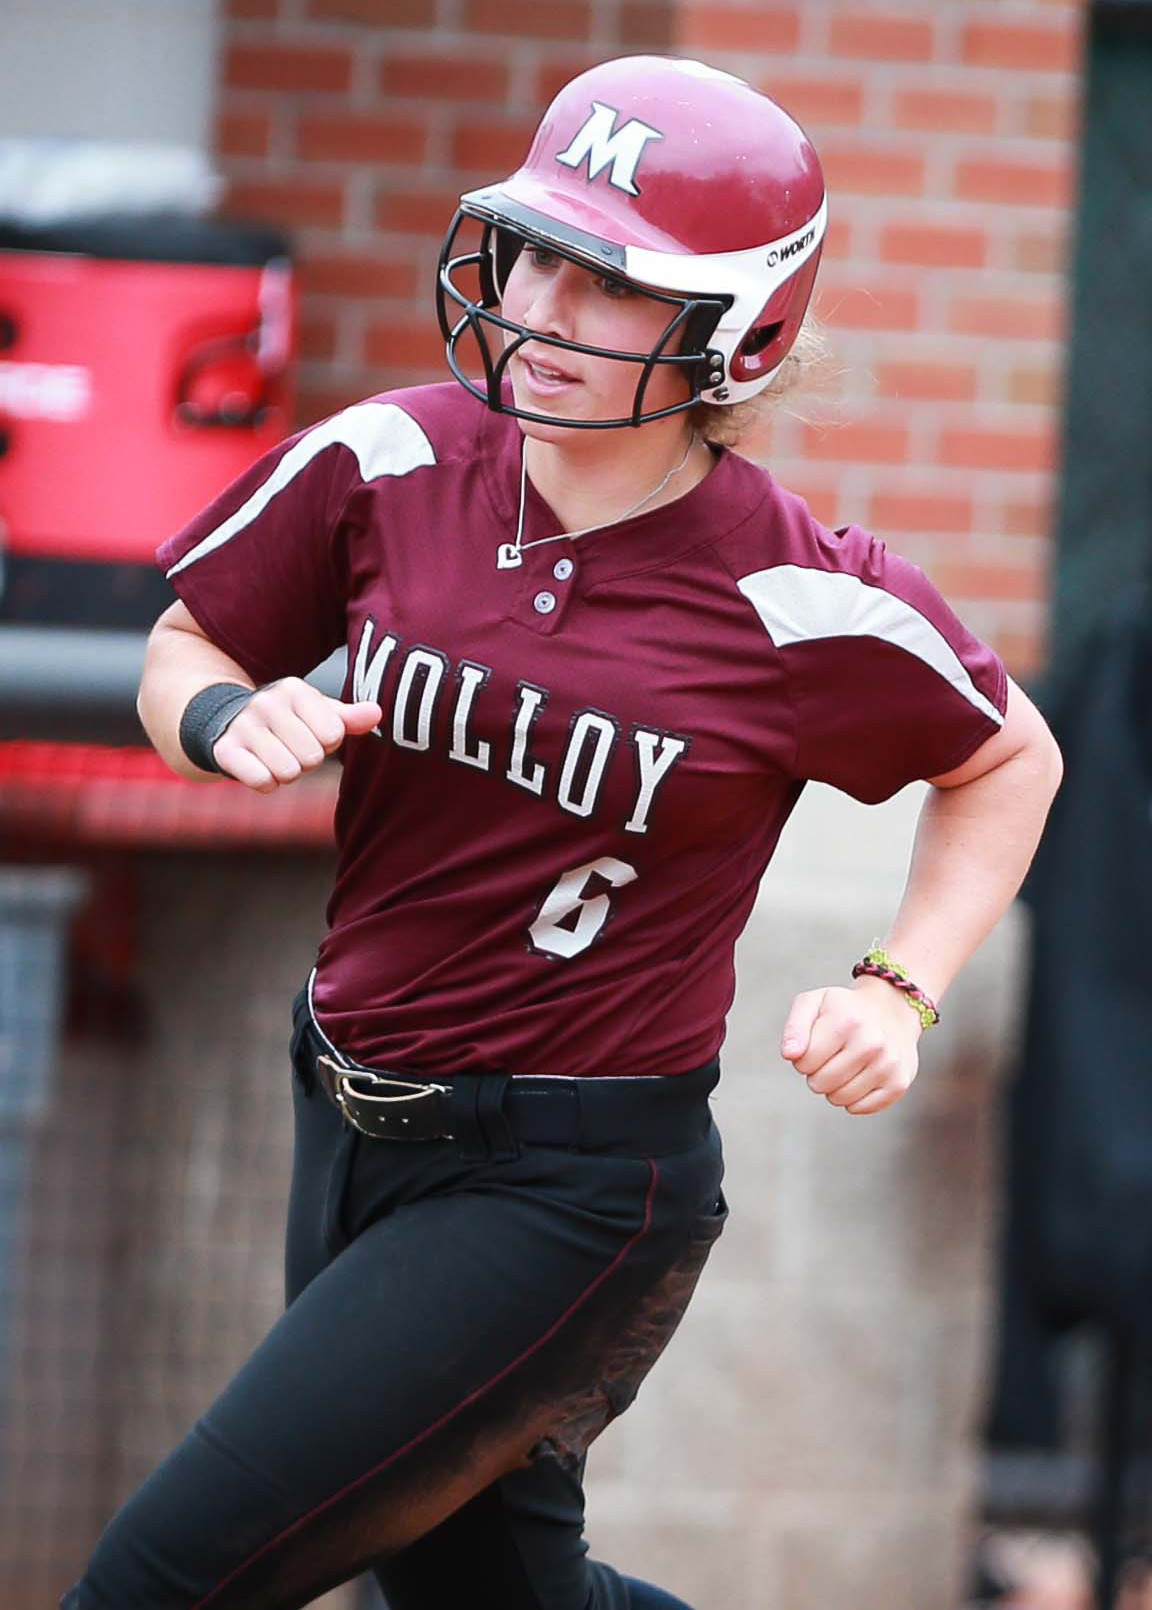 Senior Nicolette Sinagra led Molloy in most offensive categories a year ago and was selected as the East Coast Conference Co-Preseason Player of the Year for 2014.